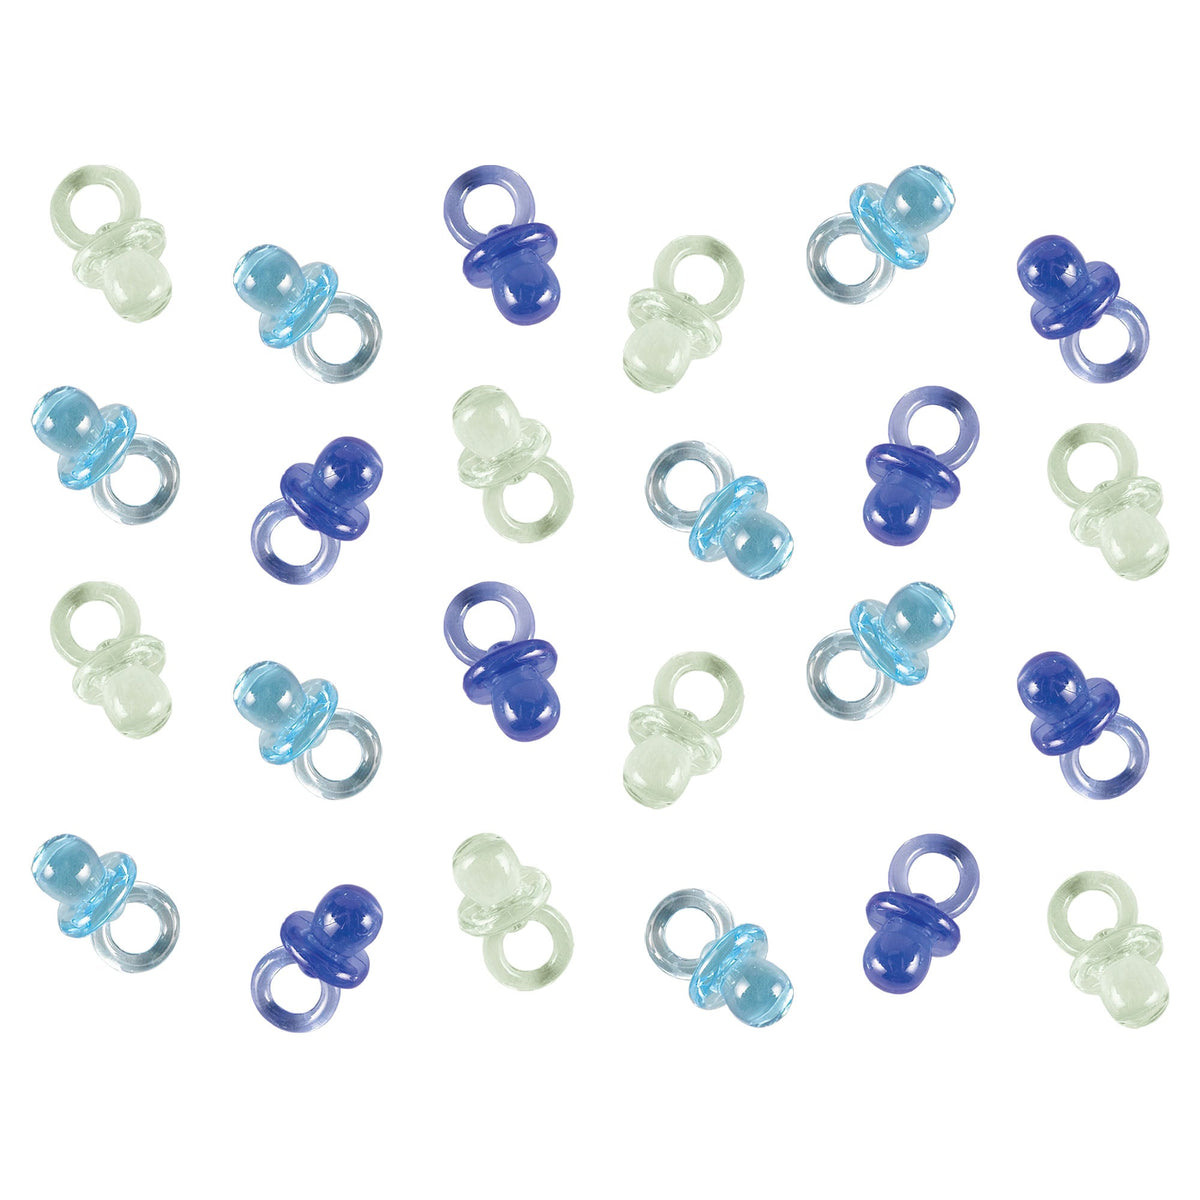 Baby Shower Blue Pacifier 1" x 1/2" Favors package of 24